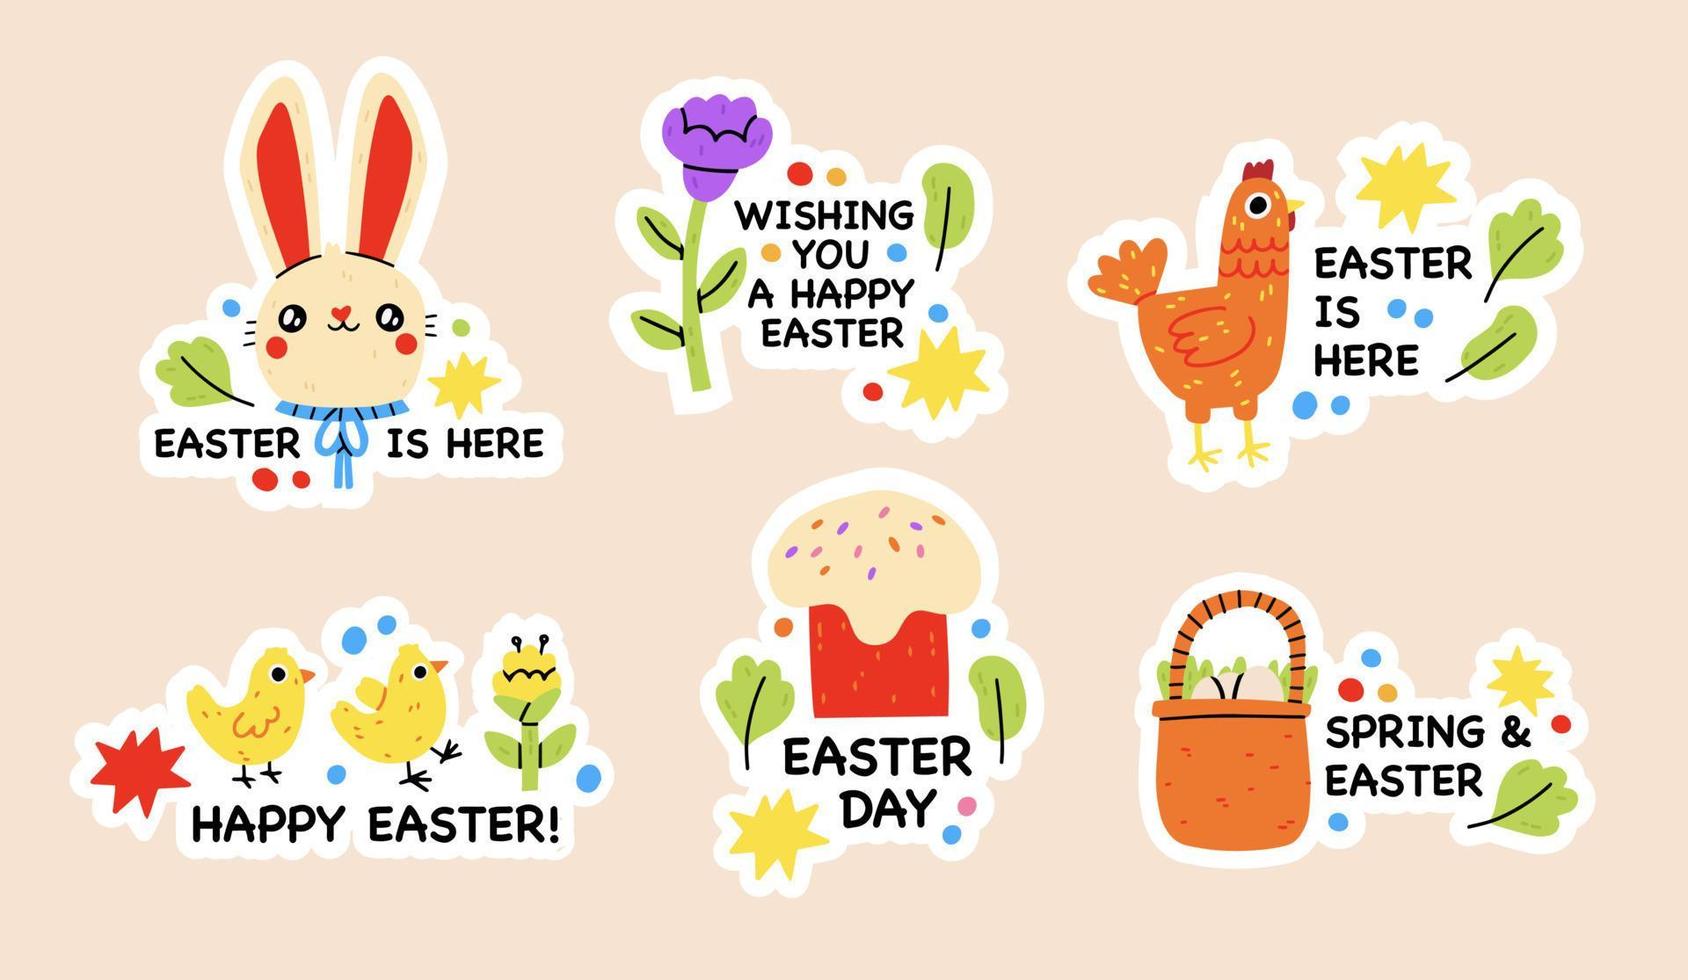 Easter spring doodle elements. Rabbit, flowers and chickens, cute easter theme symbols. Holiday easter icons cartoon illustration stickers with calligraphy text. Easter greeting cars. Hand draw child vector